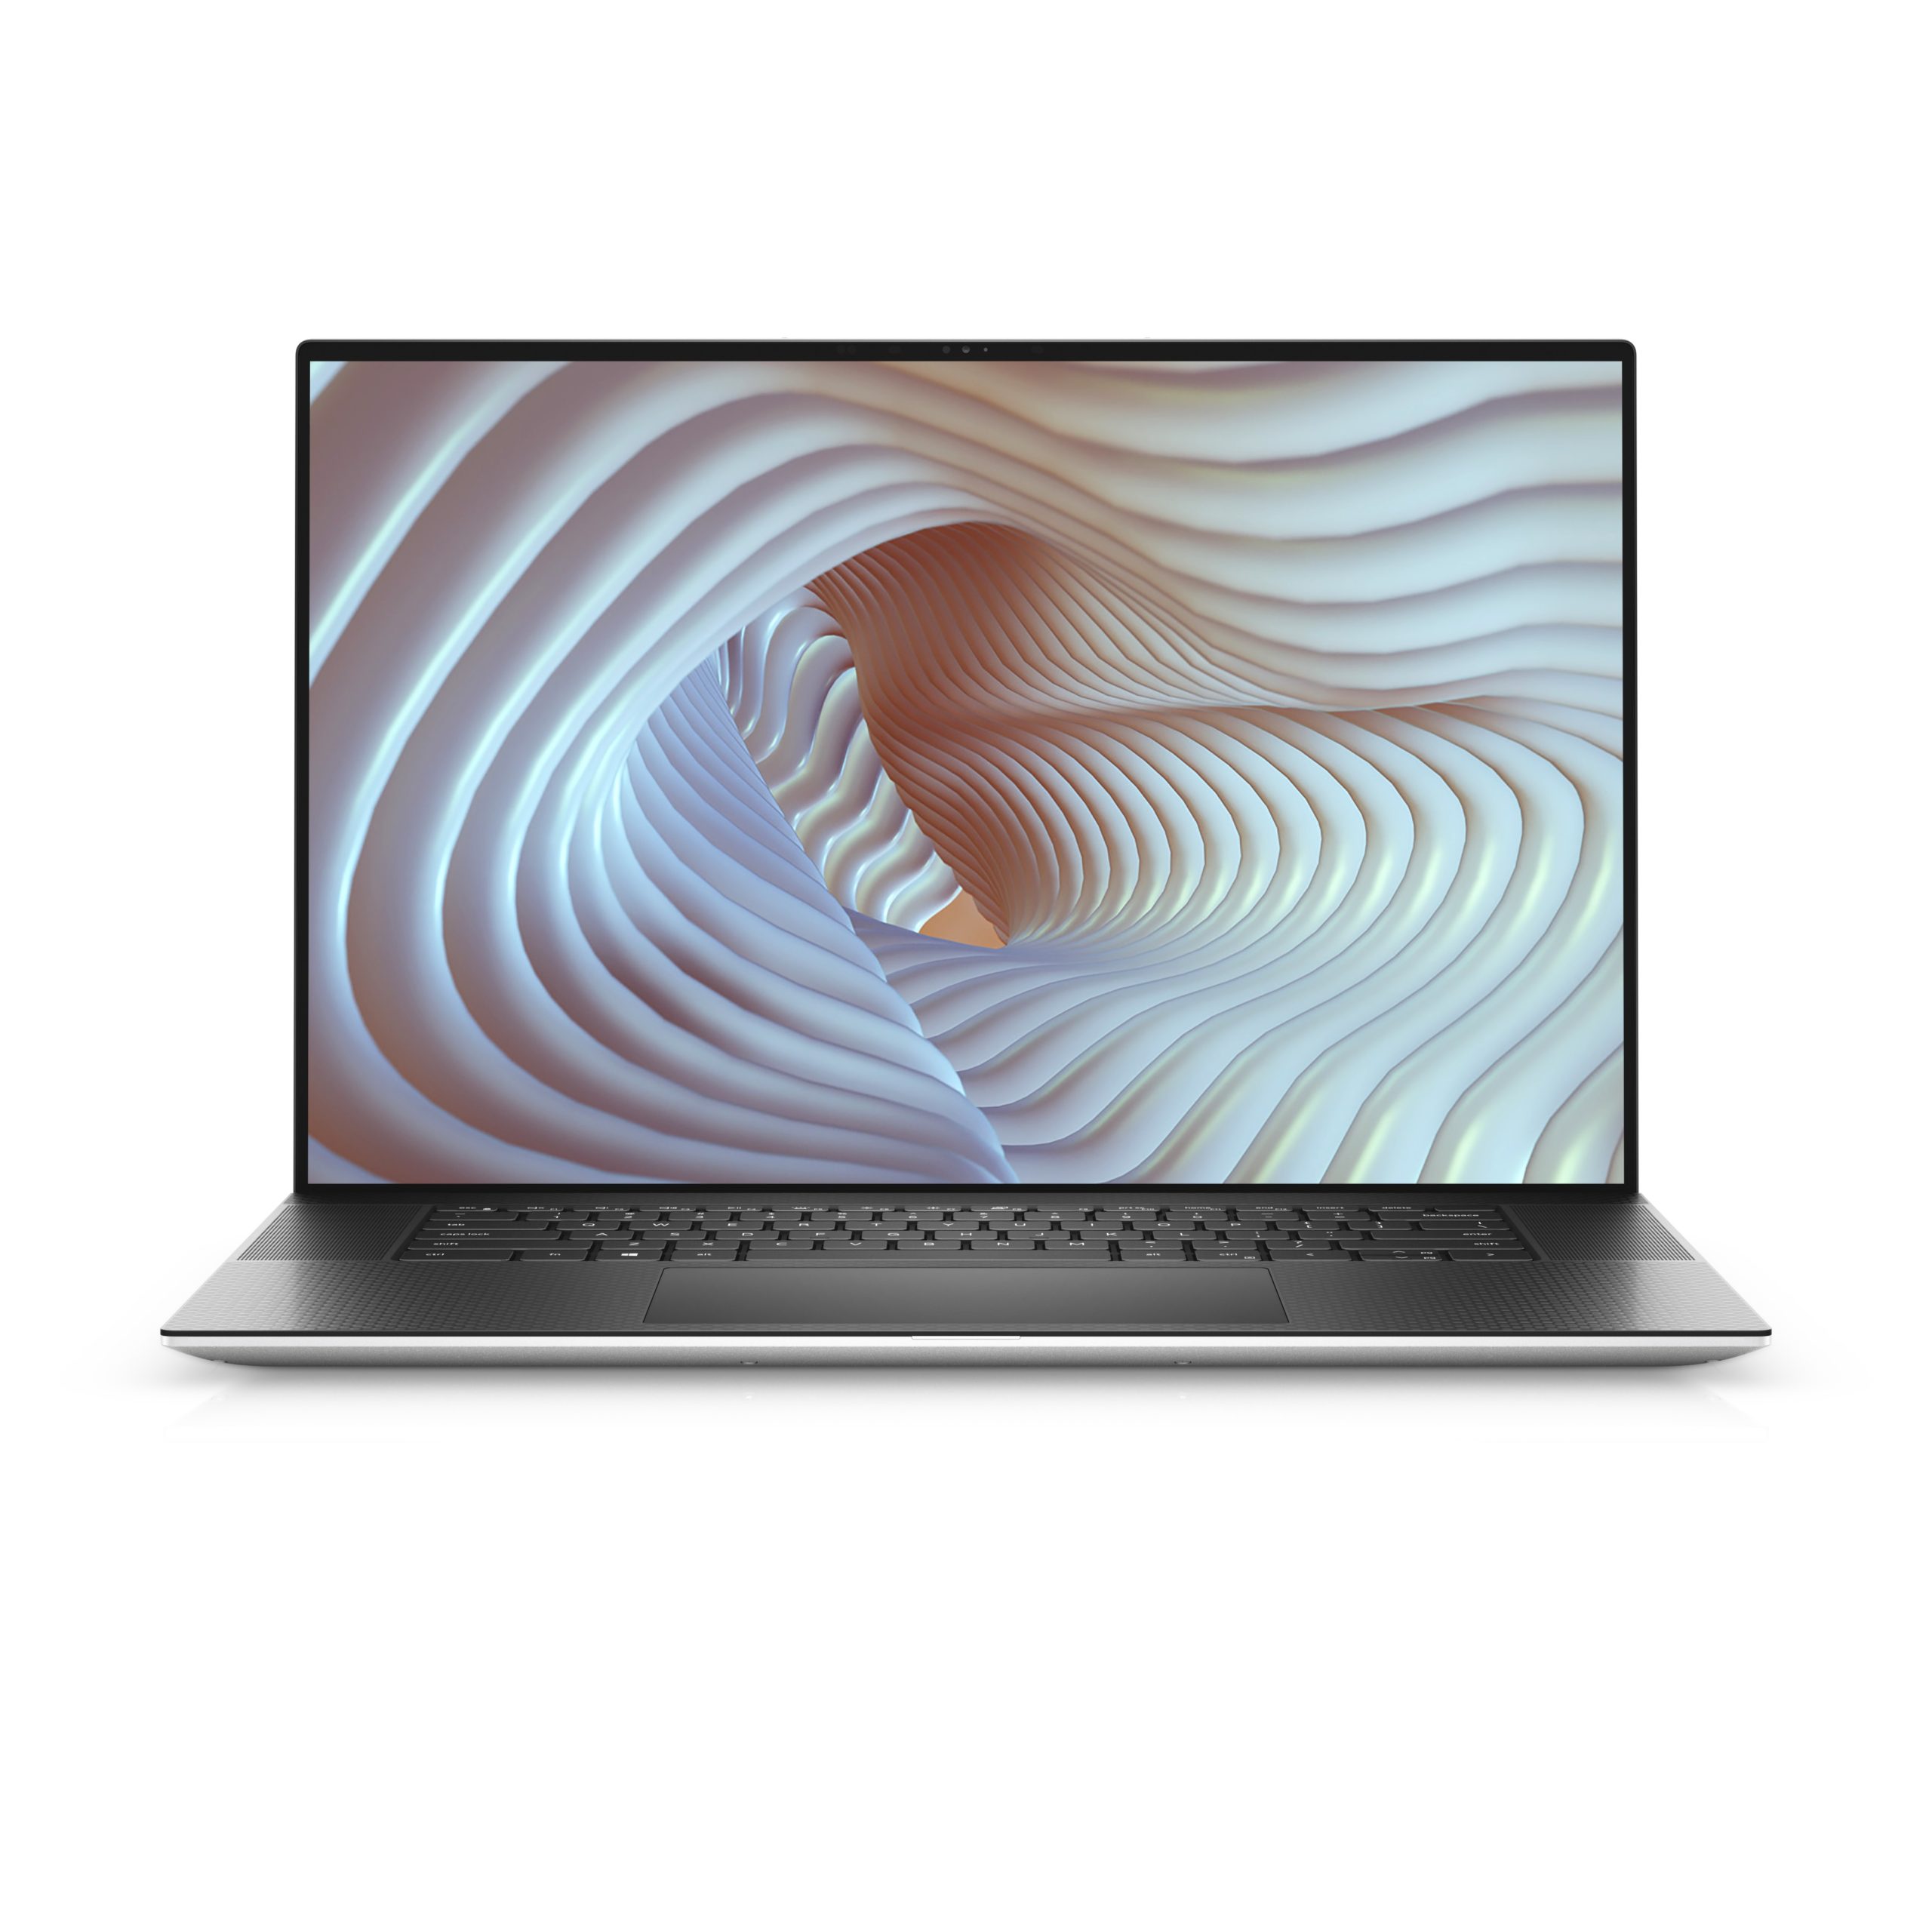 Dell XPS 17 with wavy pattern on screen.